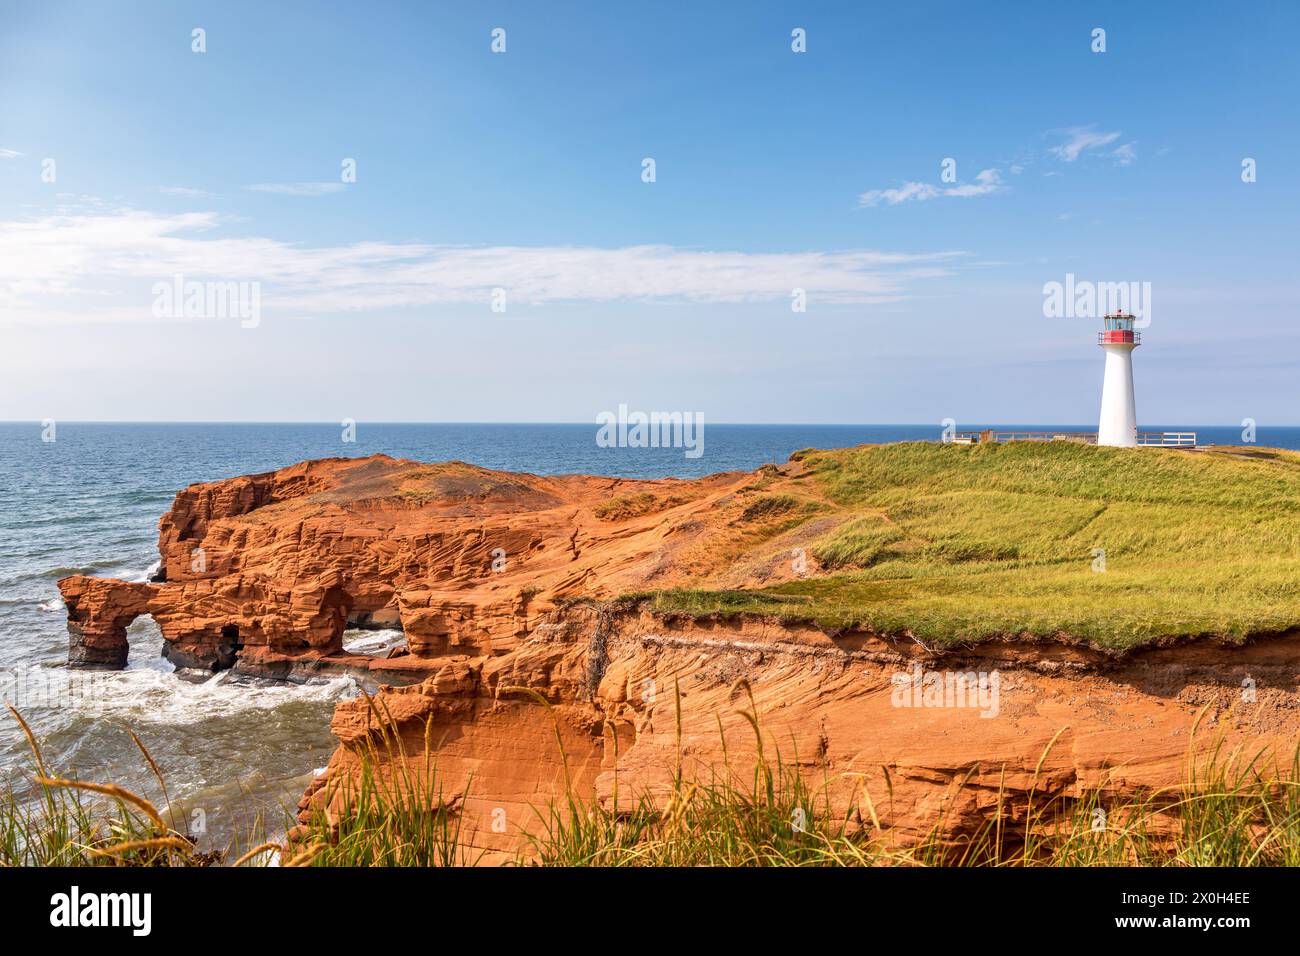 Borgot, or Cape Herisse lighthouse of Cap aux Meules, Magdalen Islands, Canada. The lighthouse stands on the rugged red cliffs of the Etang du Nord. Stock Photo